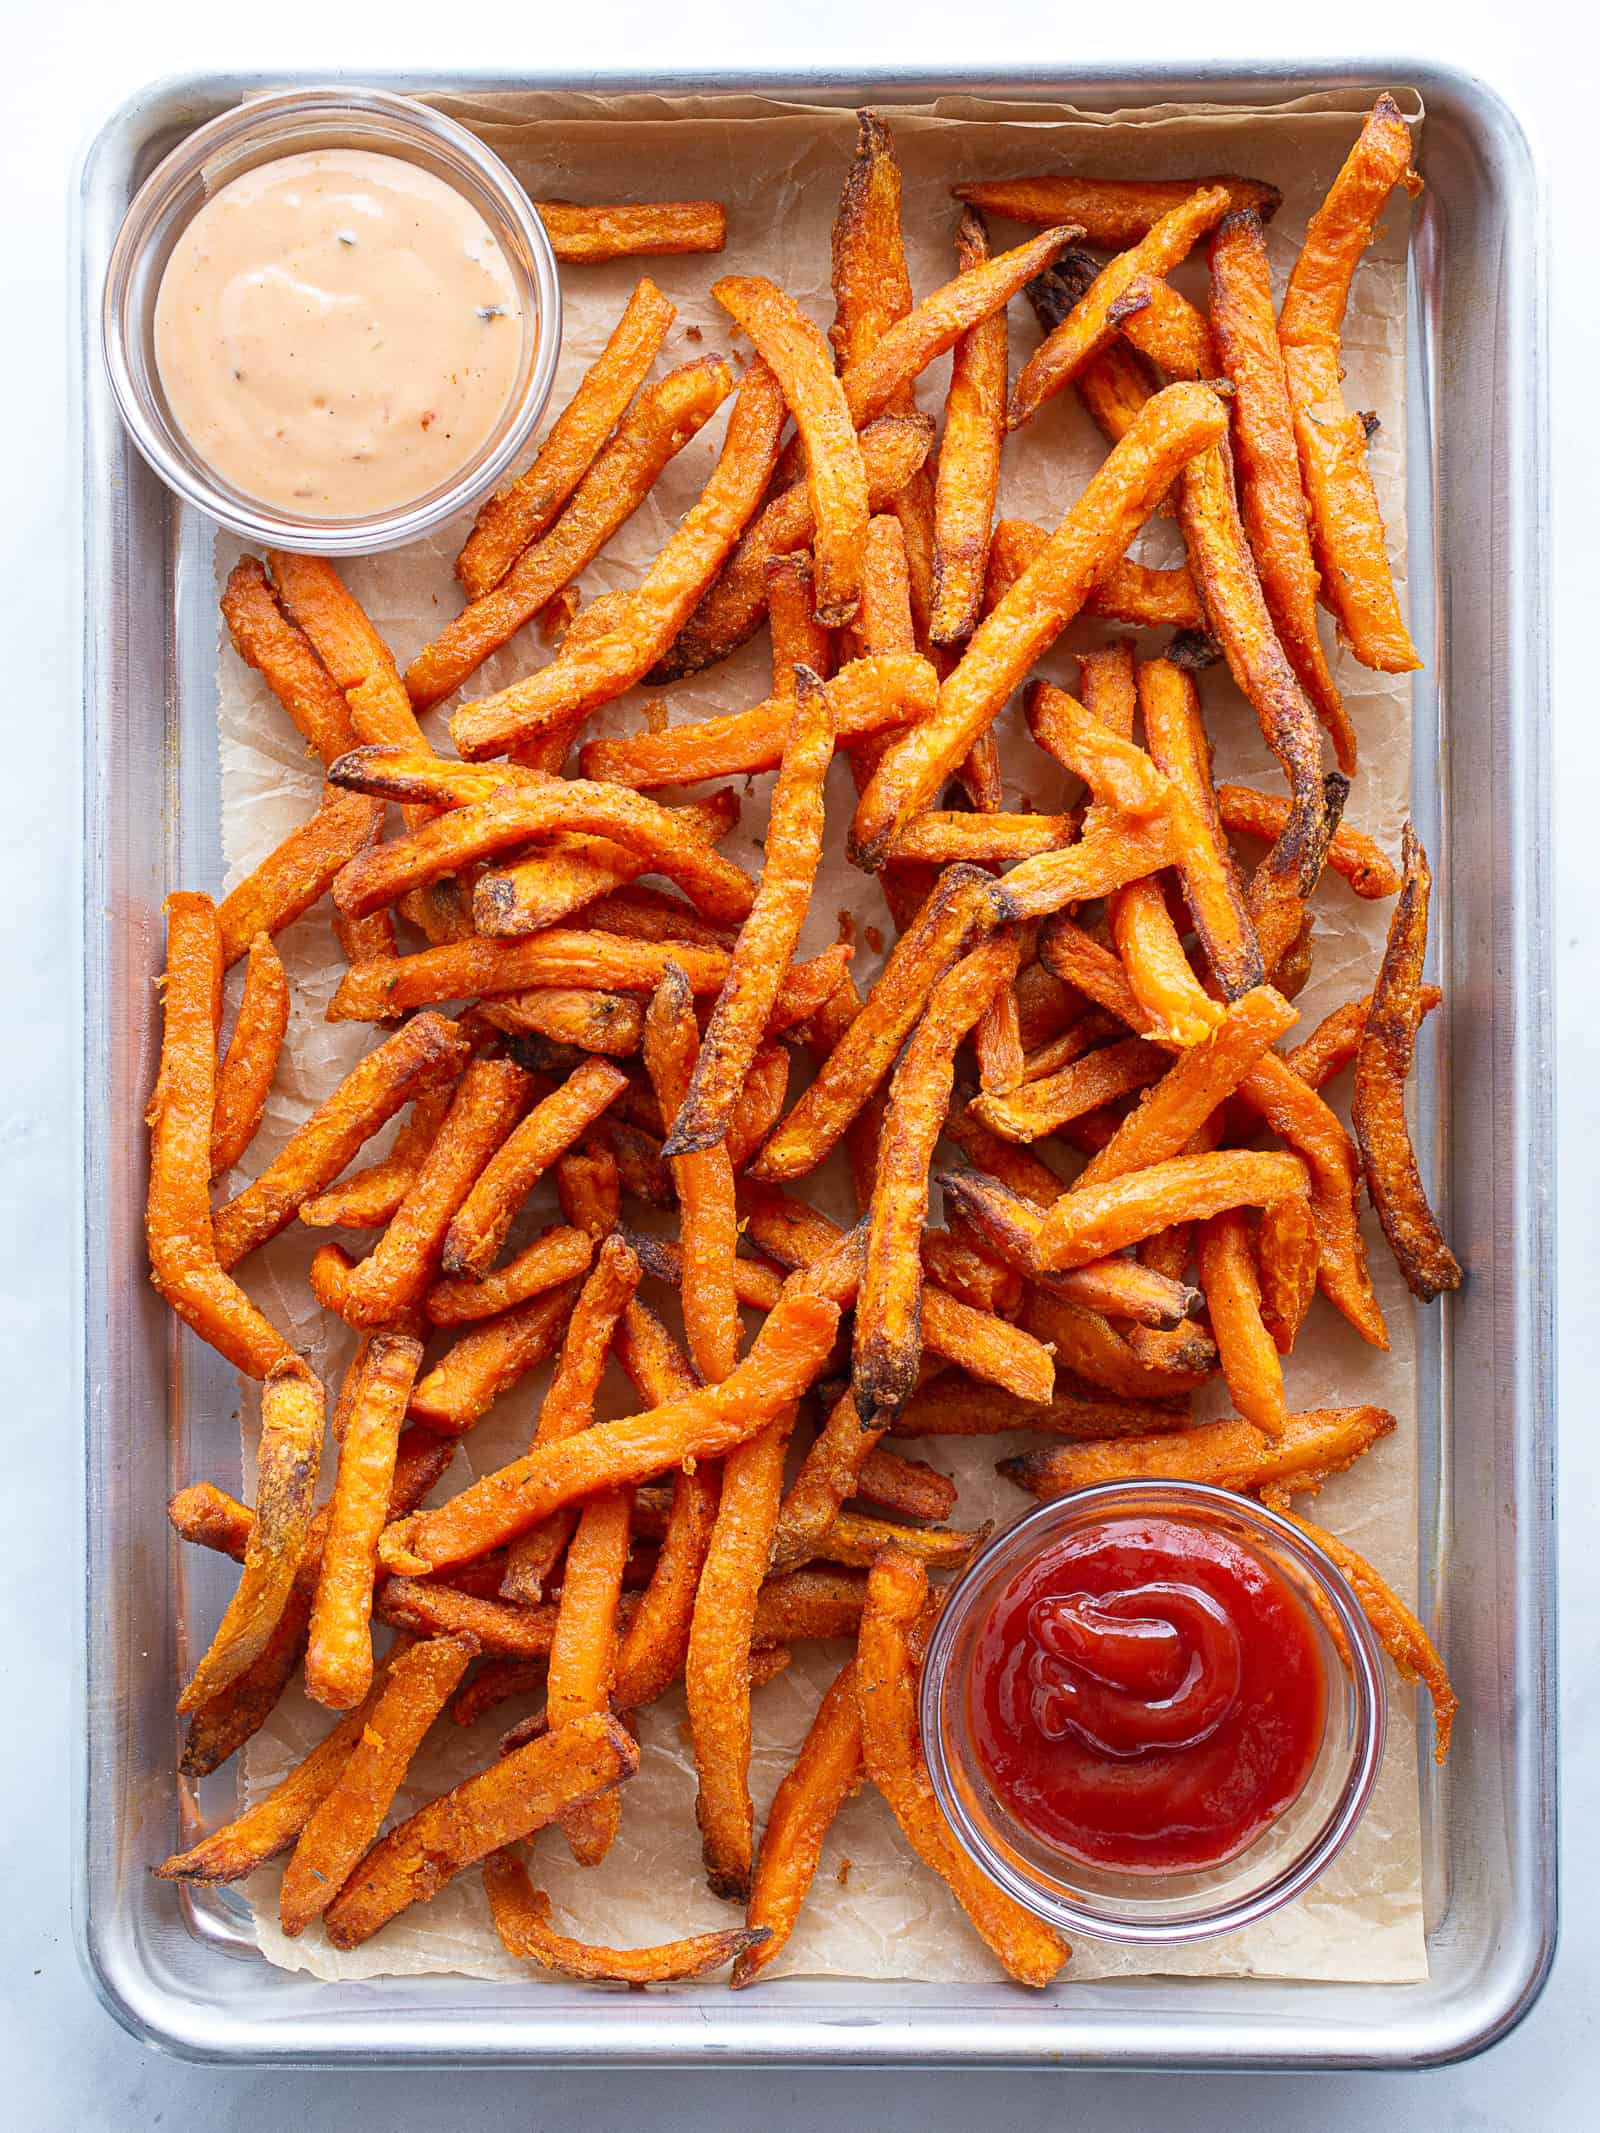 Cooked frozen sweet potato fries on a sheet pan. Spicy mayo in a bowl, upper left corner. Ketchup in bowl, lower right.